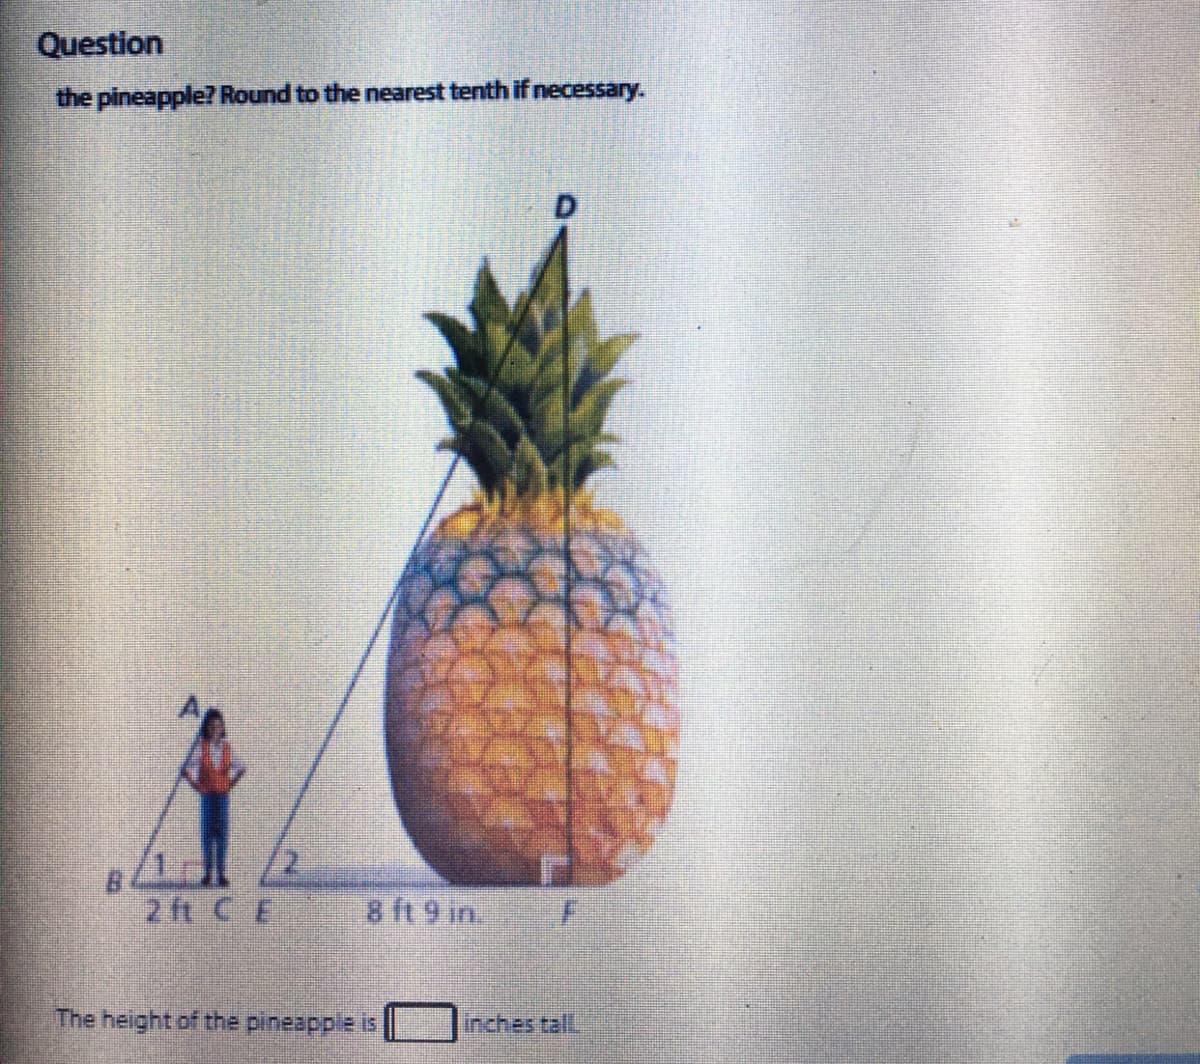 Question
the pineapple? Round to the nearest tenth if necessary.
2 ft C E
8 ft 9 in.
The height of the pineapple is
inches tall
